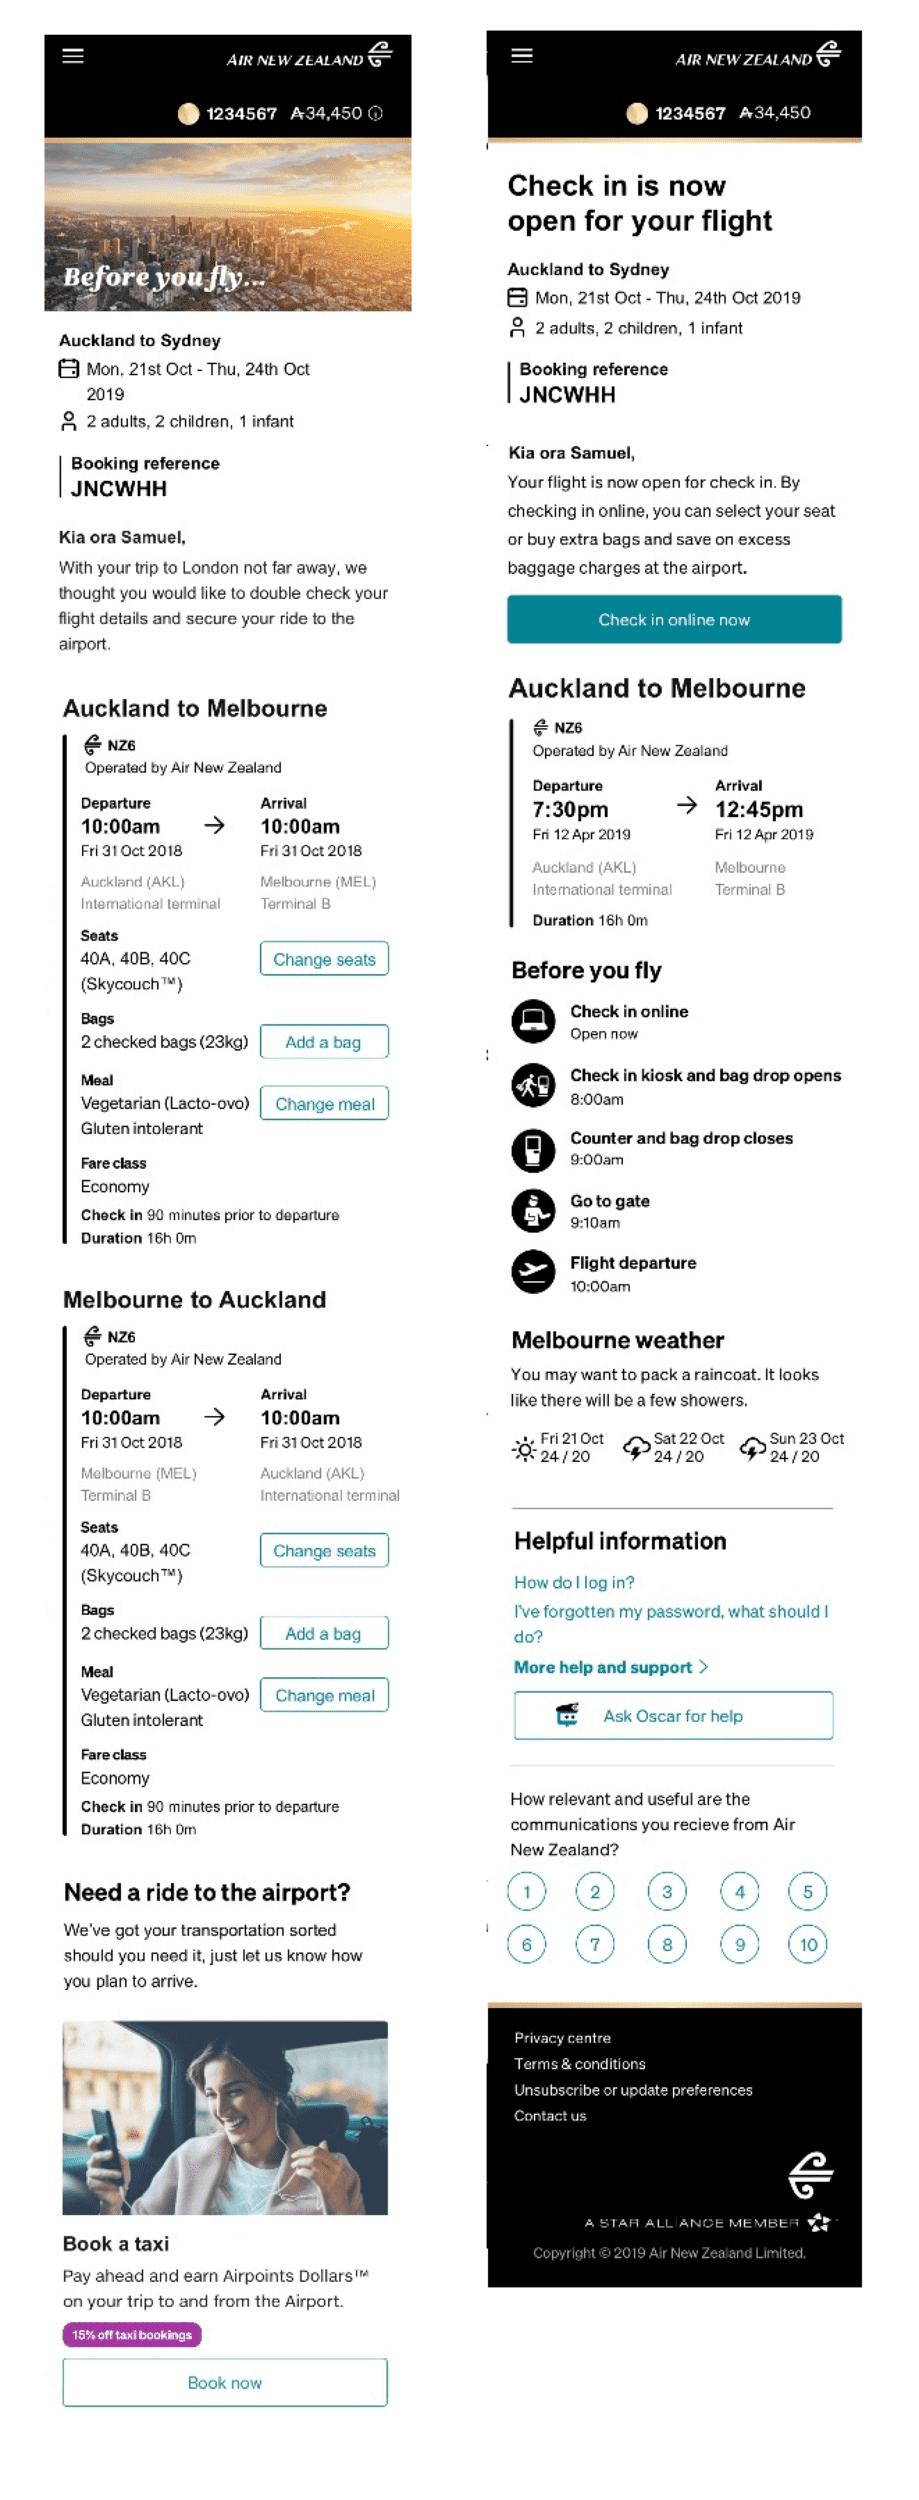 Sample pre-flight Air New Zealand emails